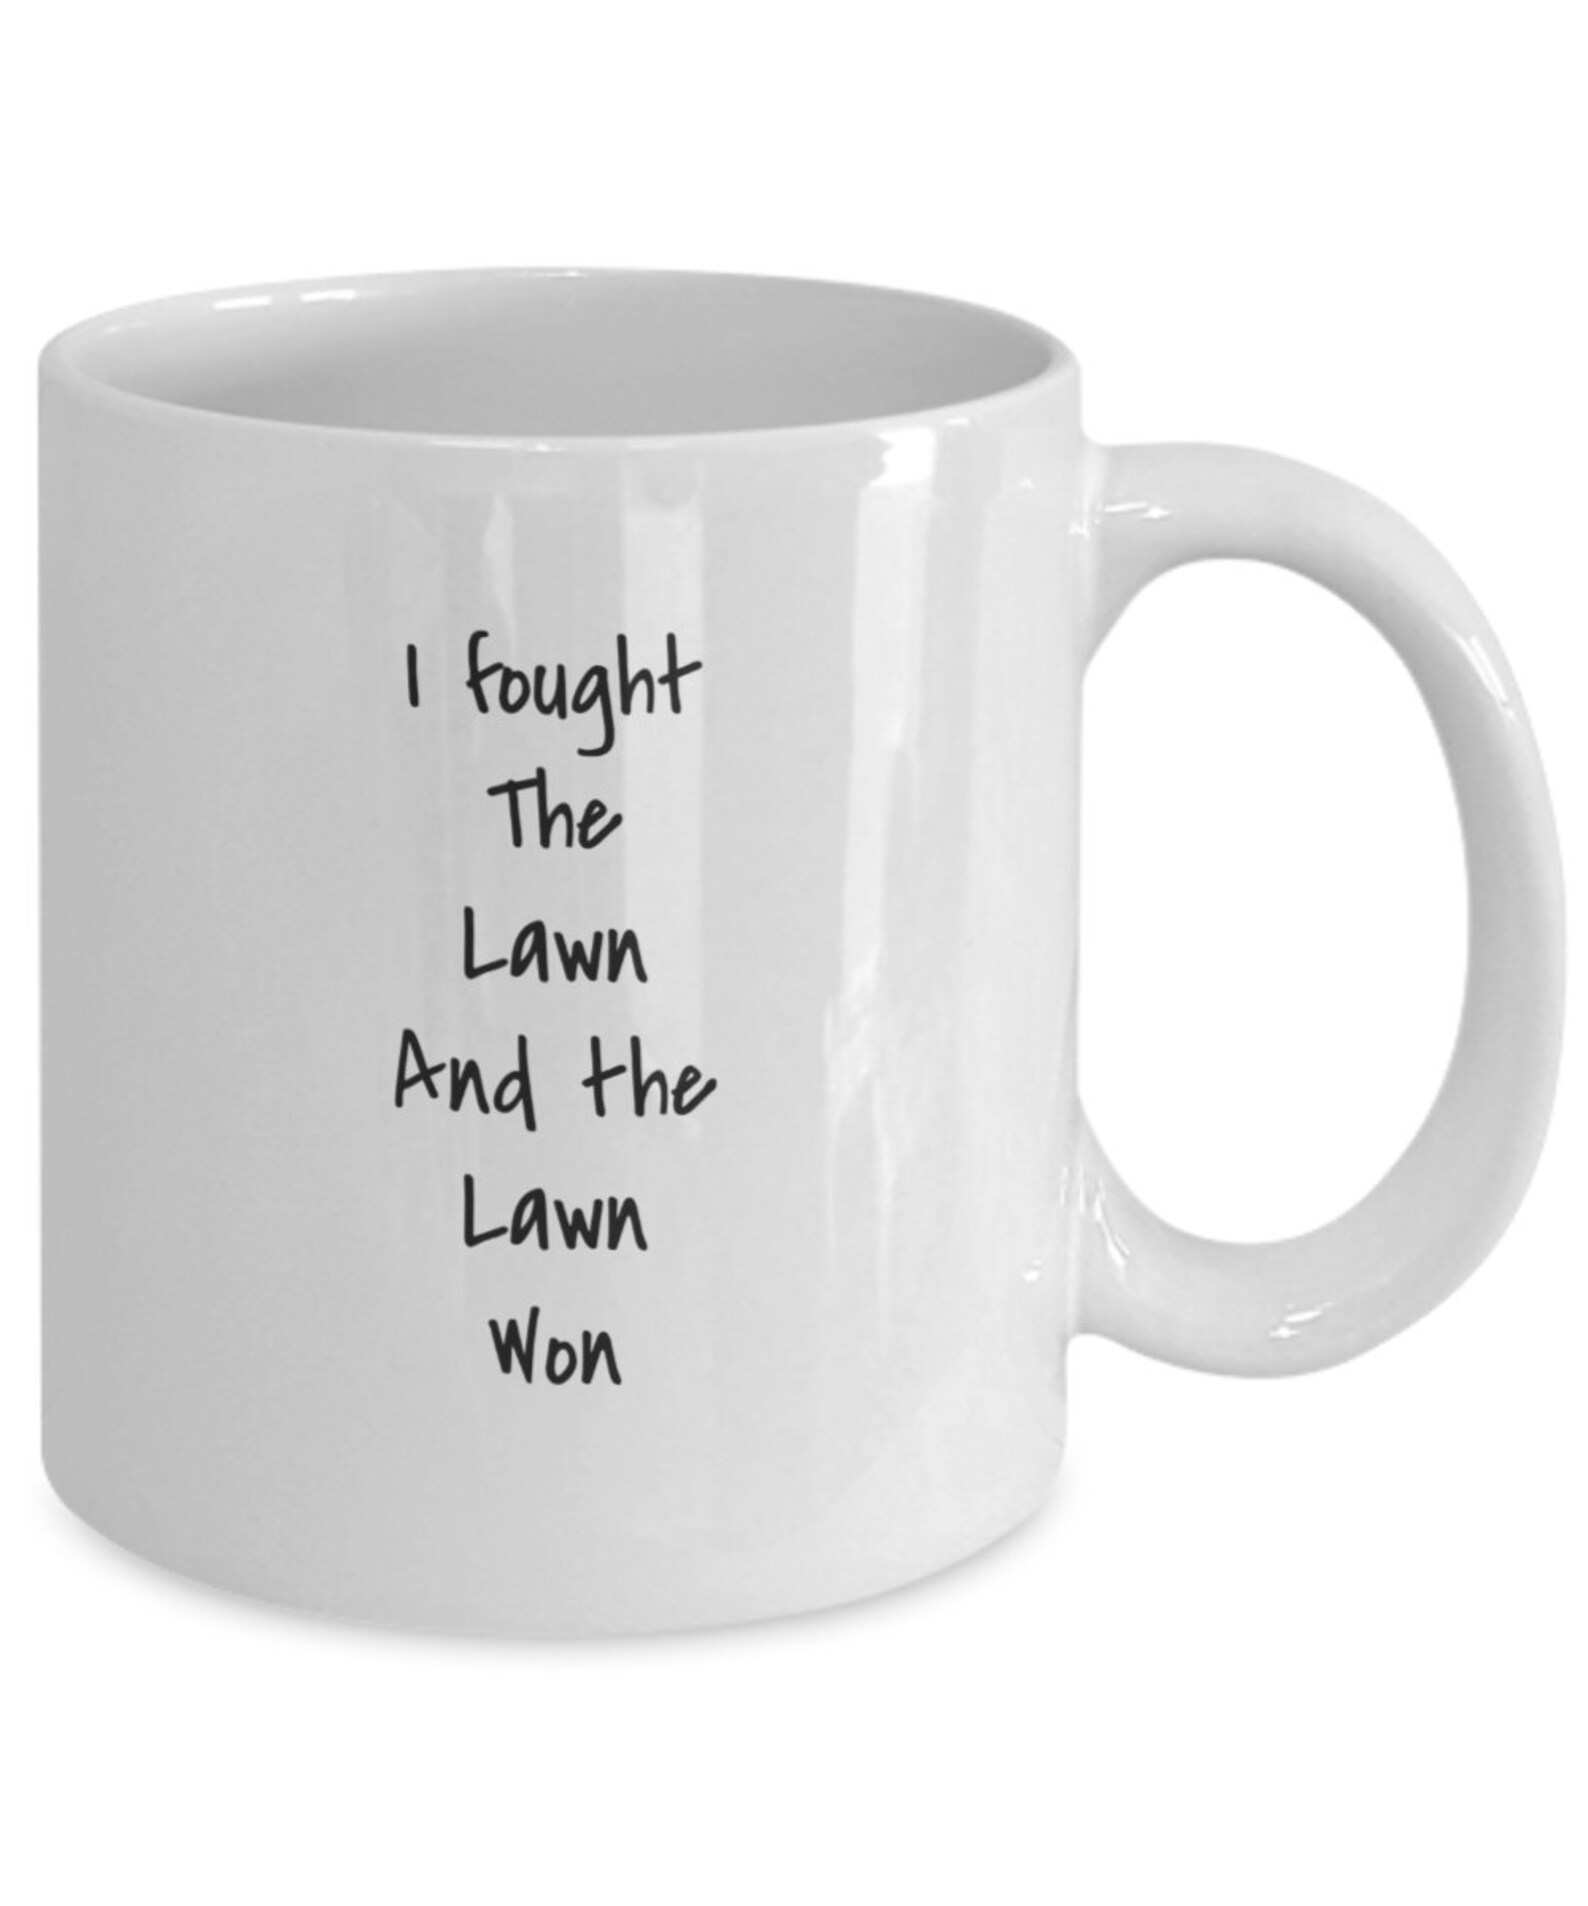 Lawn Mug Gift for Gardeners Garden Lovers Fathers Day Gift